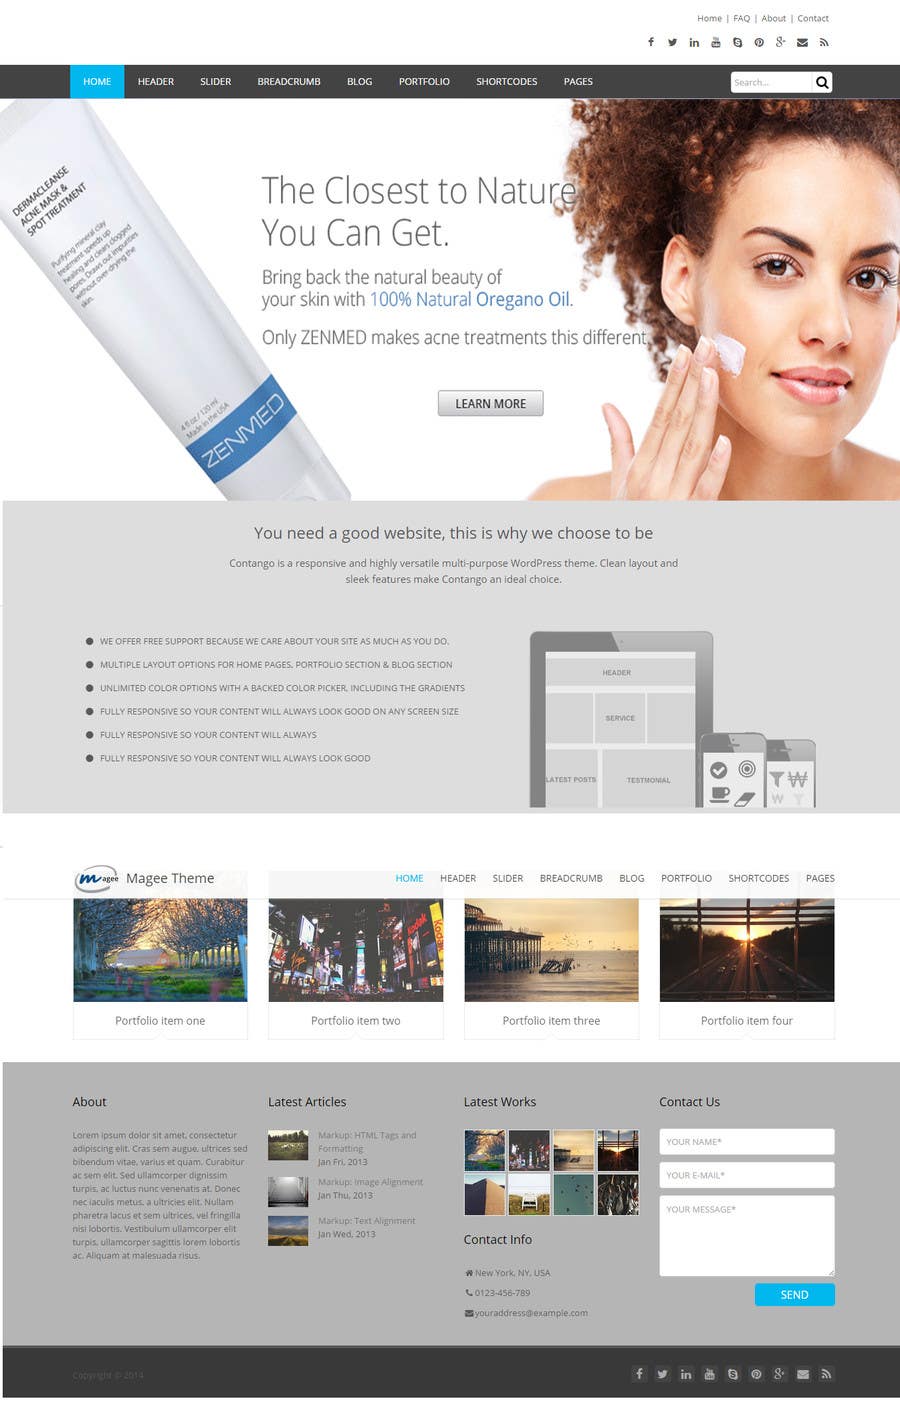 Proposition n°7 du concours                                                 Wordpress Website for Amazon Skincare Product
                                            